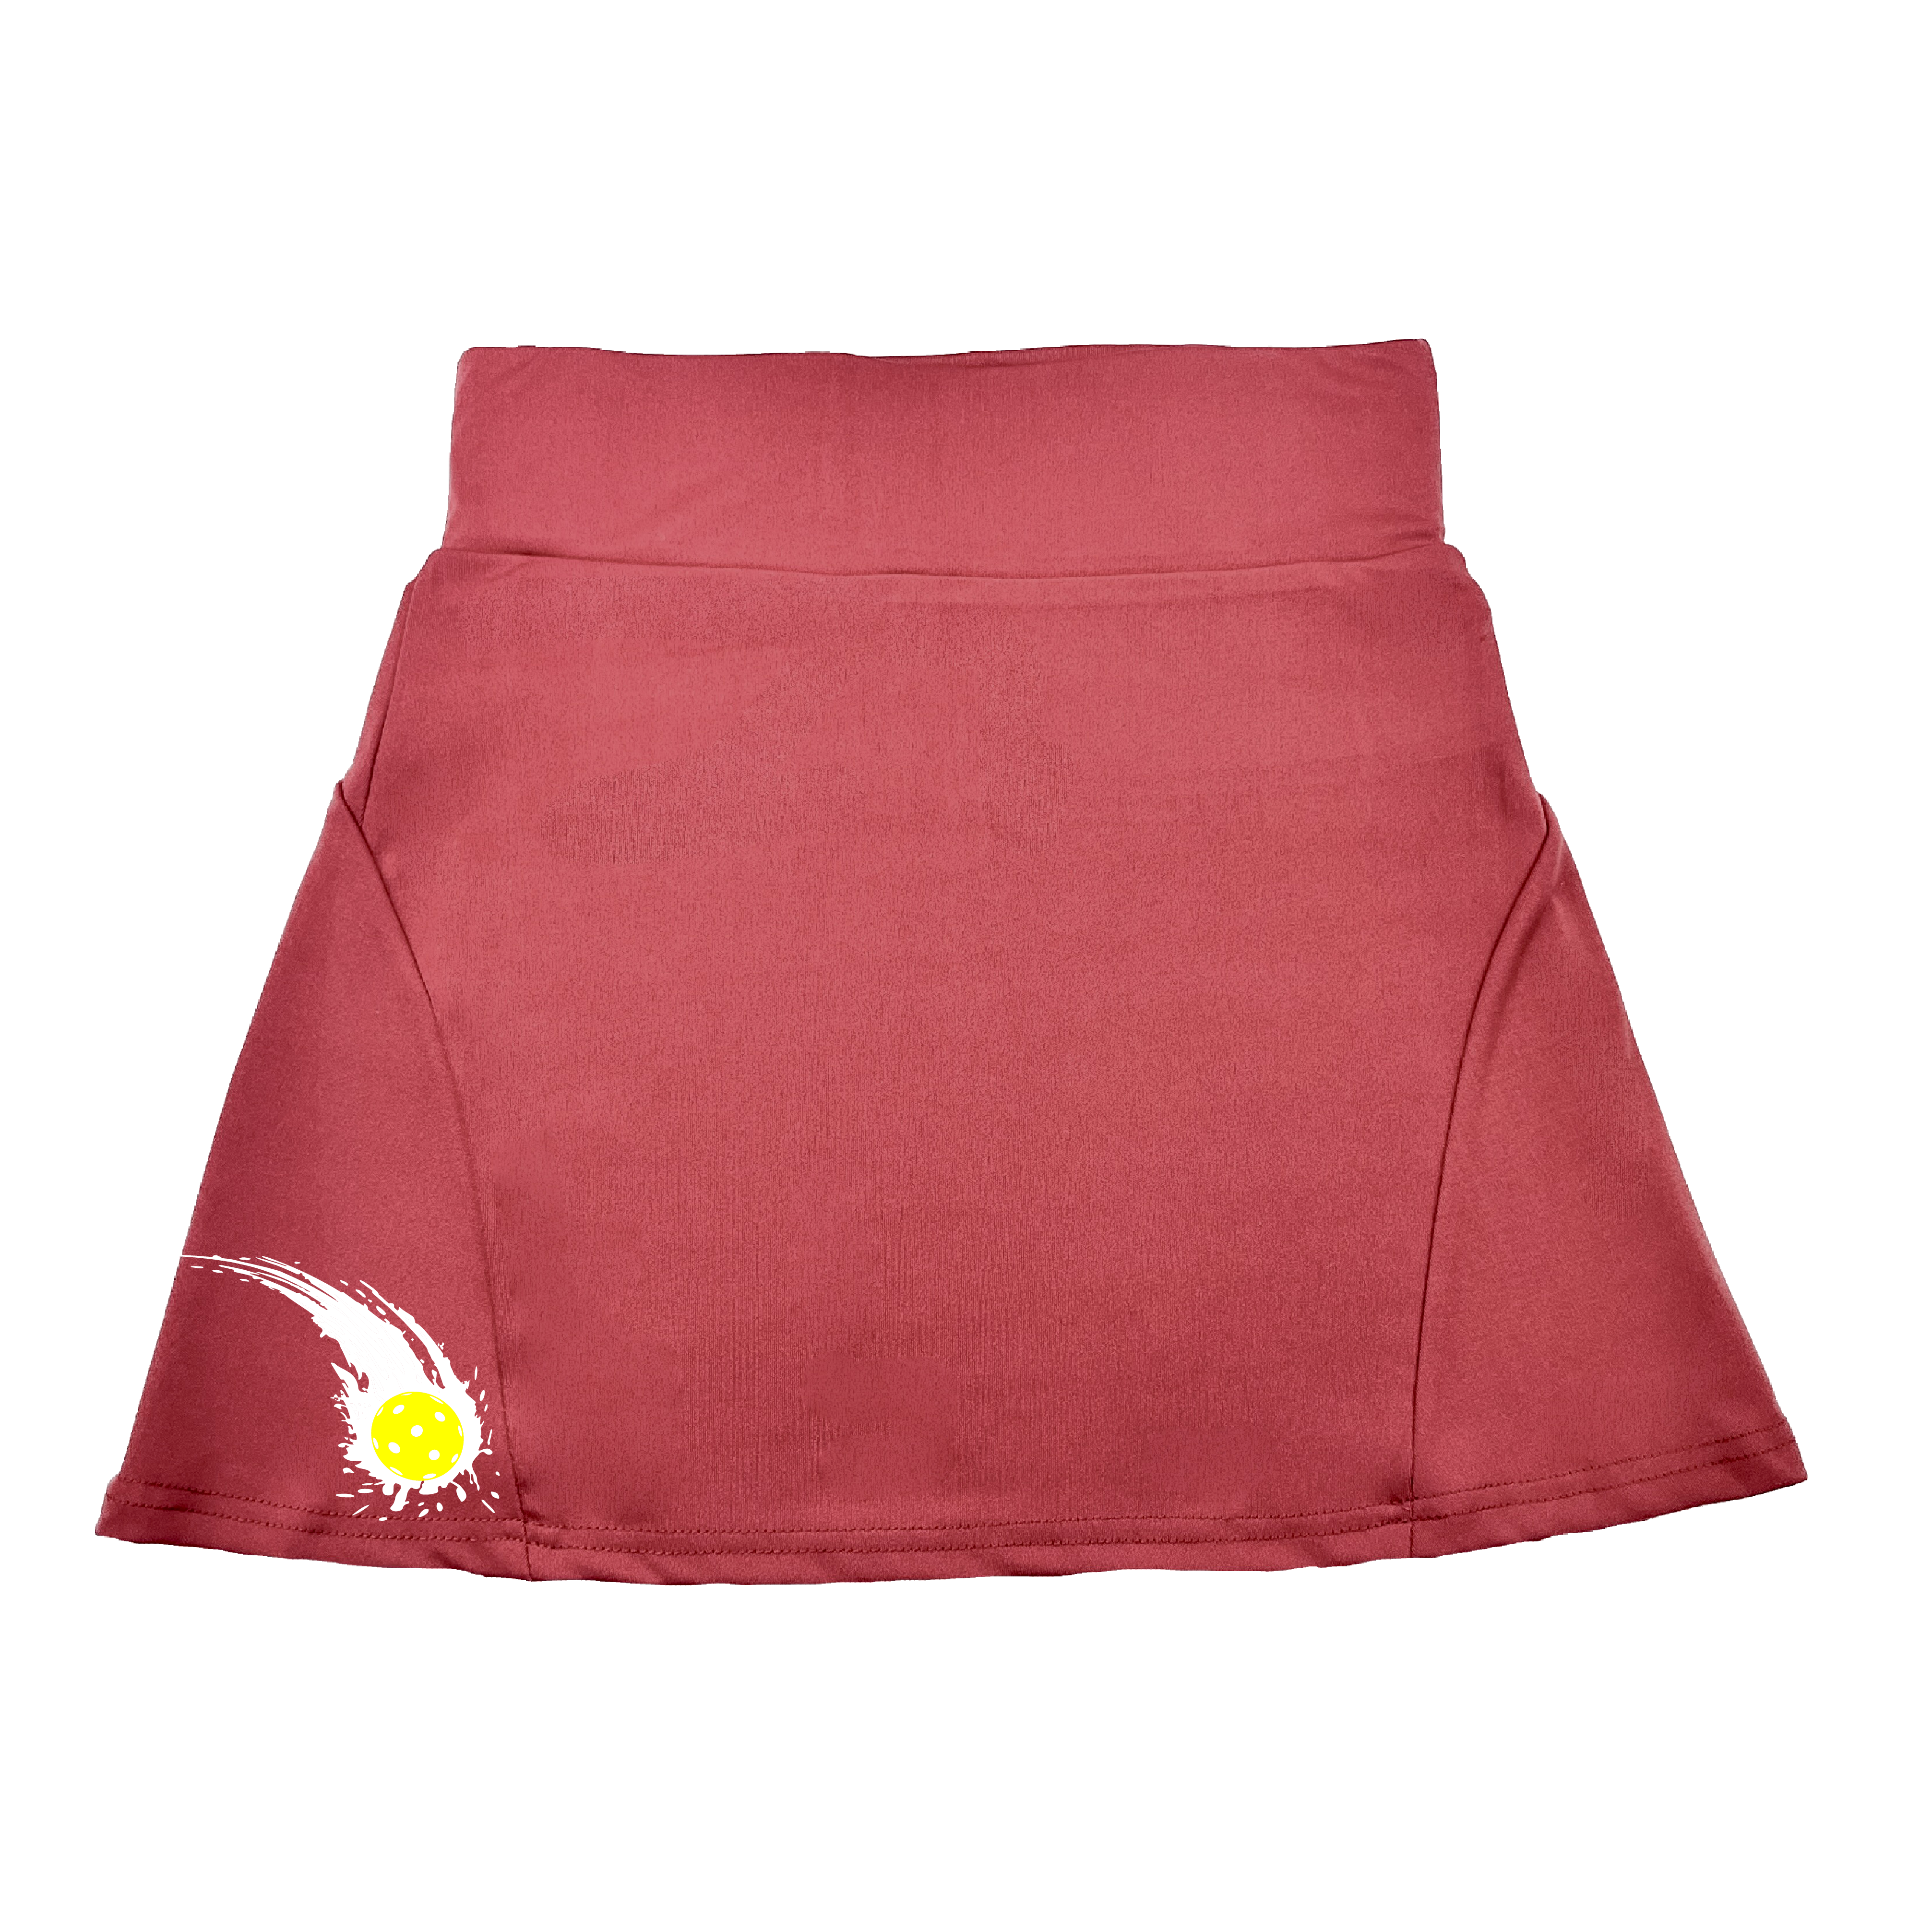 Pickleball Flirty Skort Design: Pickleball Impact  These flirty skorts have a flat mid-rise waistband with a 3 inch waistband.  Light weight without being see through and the material wicks away moisture quickly.  Flirty pleats in the back with inner shorts for free movement and stylish coverage on the courts.  A functional zipper pocket on the back and two built in pockets on the shorts for convenient storage. 